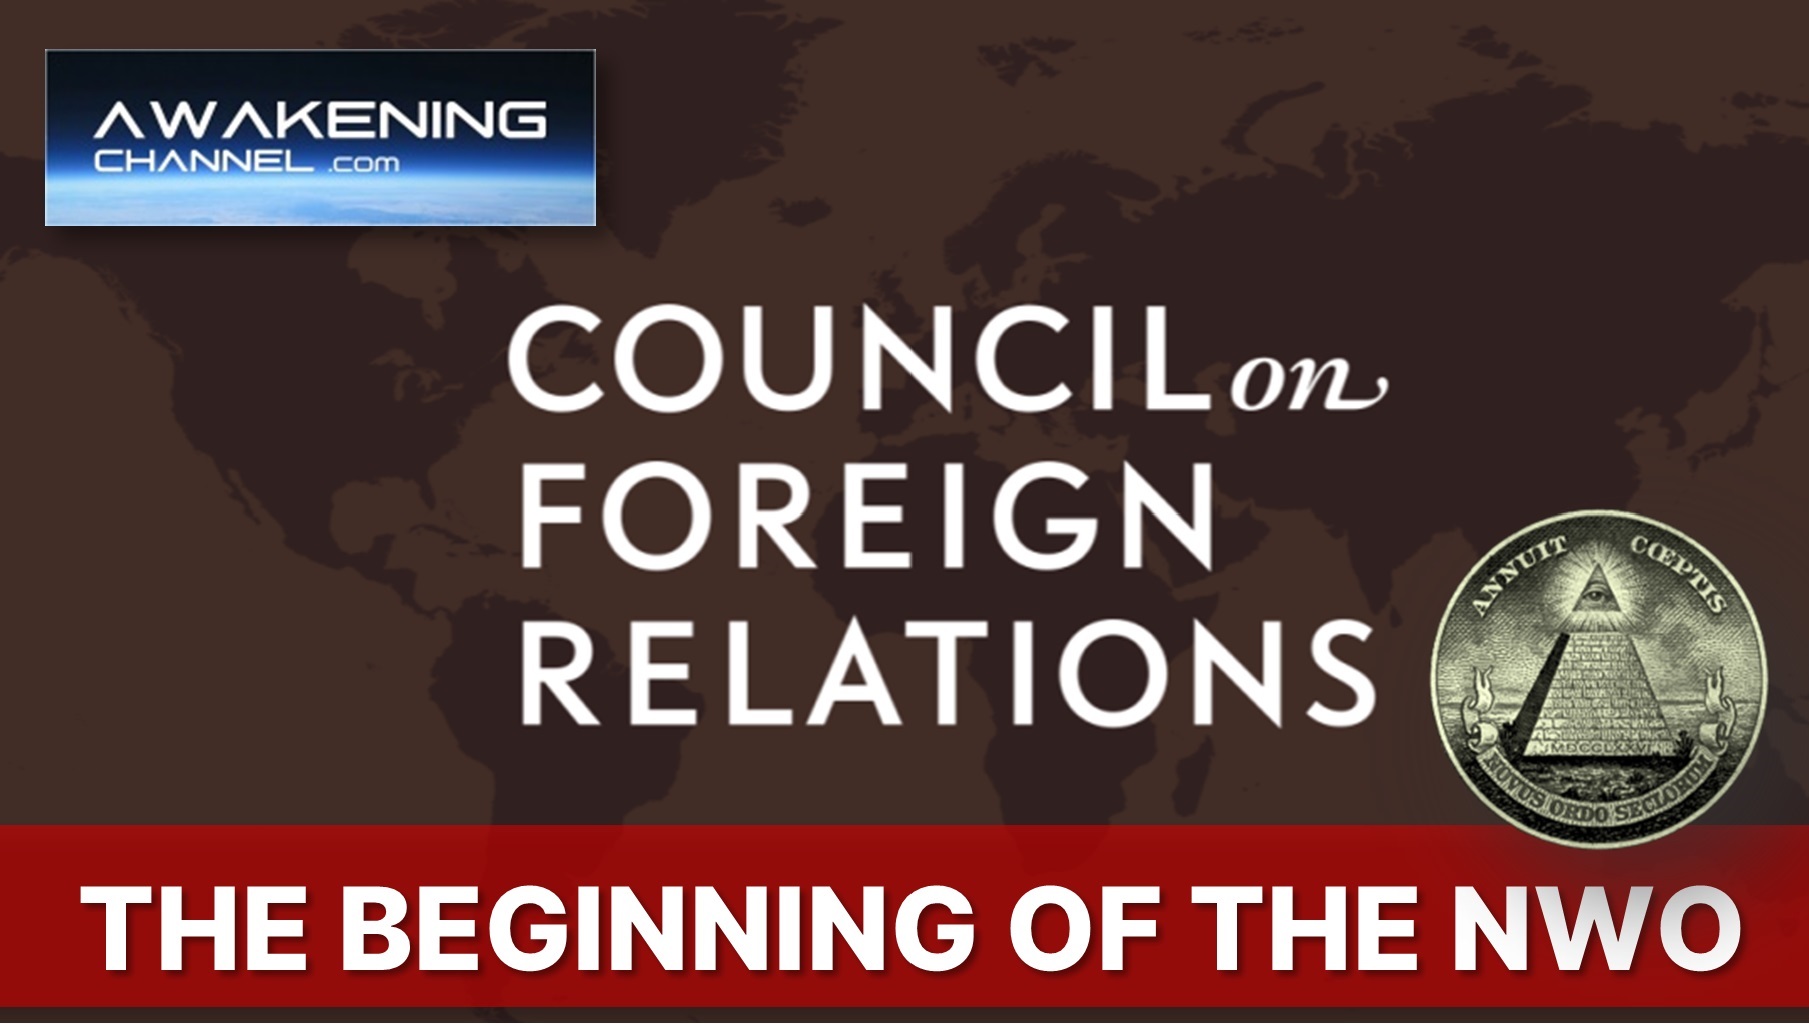 COUNCIL ON FOREIGN RELATIONS (CFR), The Beginning of the (NWO), ONE WORLD GOVERNMENT